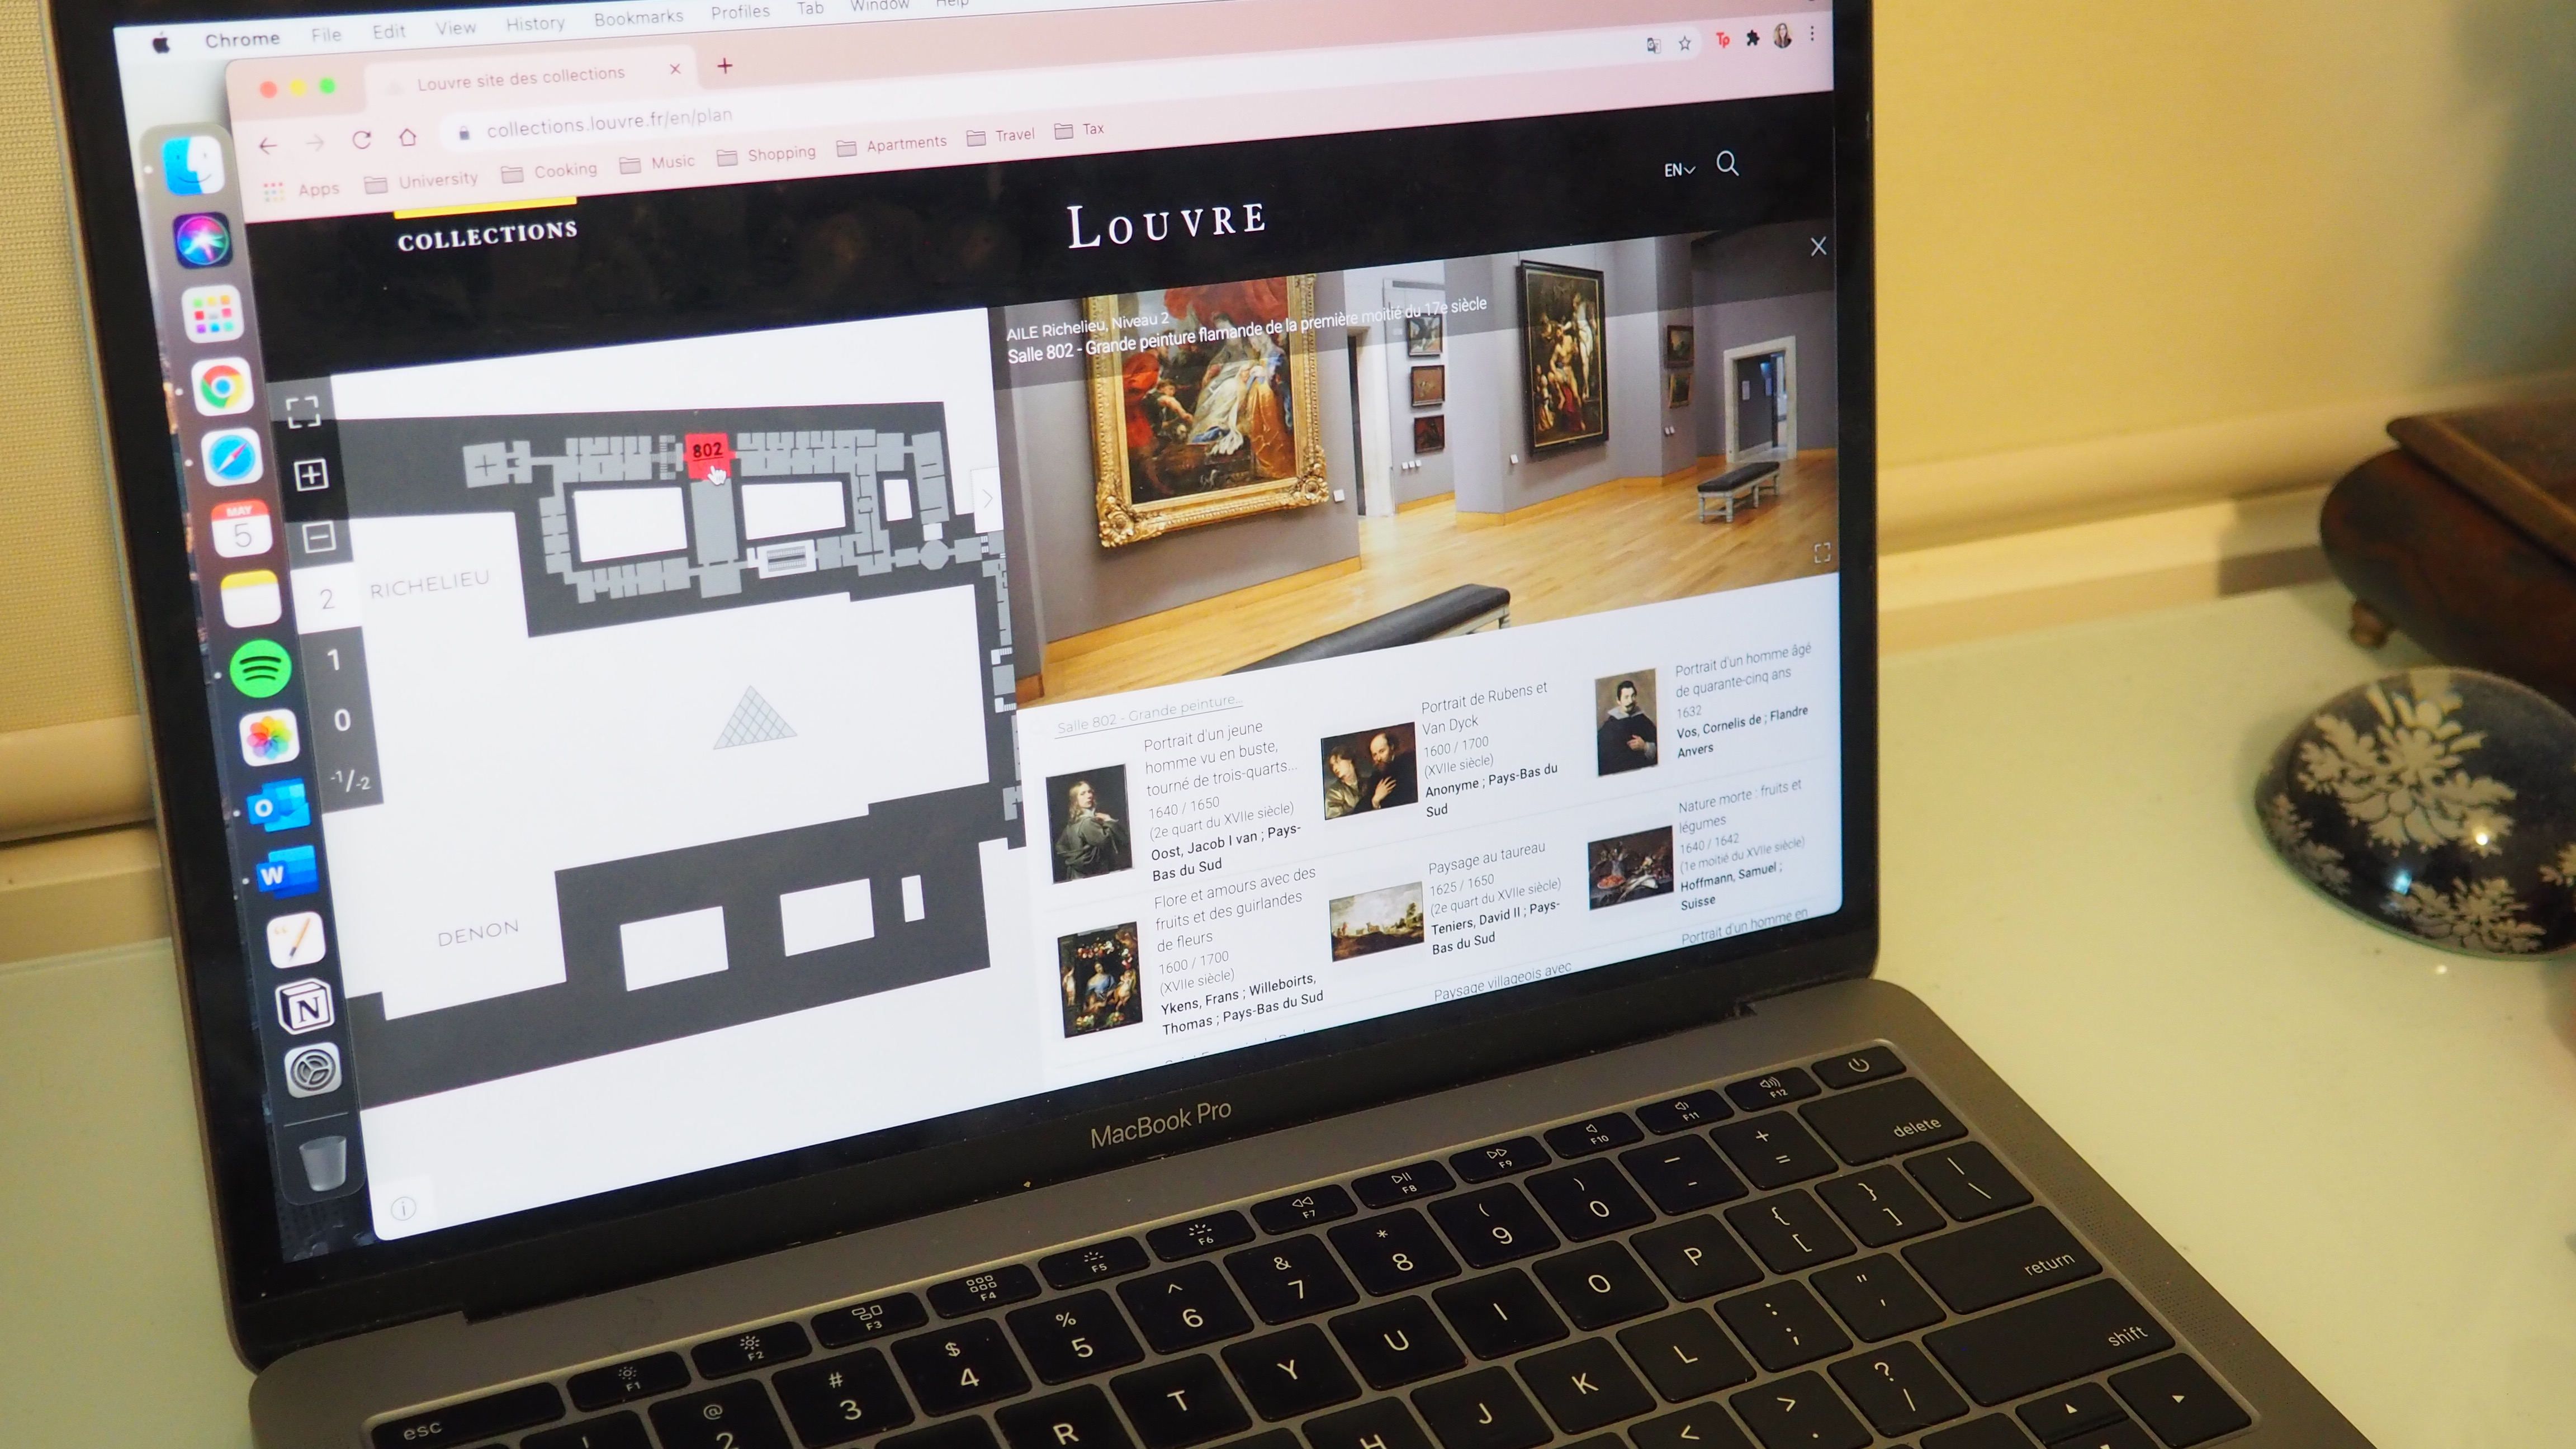 The interactive map which the Louvre's online collection can be explored